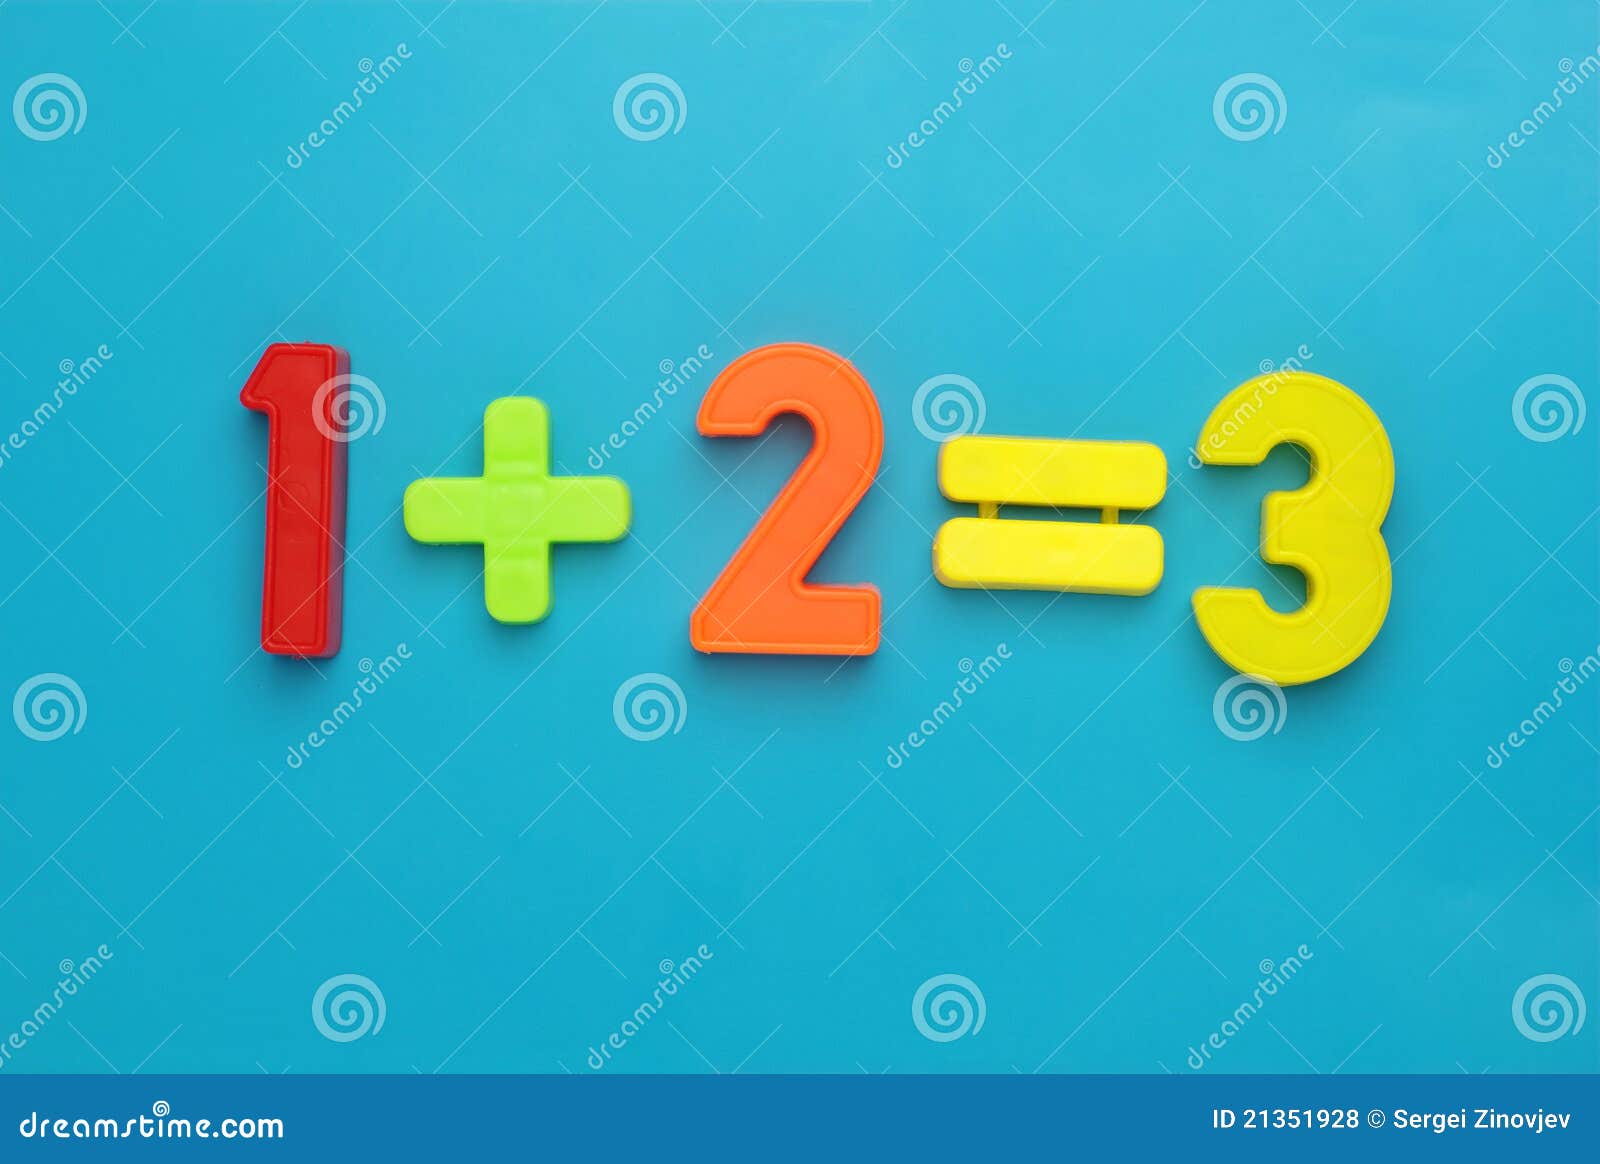 One plus two equals three. stock photo. Image of playing - 21351928 1 3 Plus 2 3 Equals